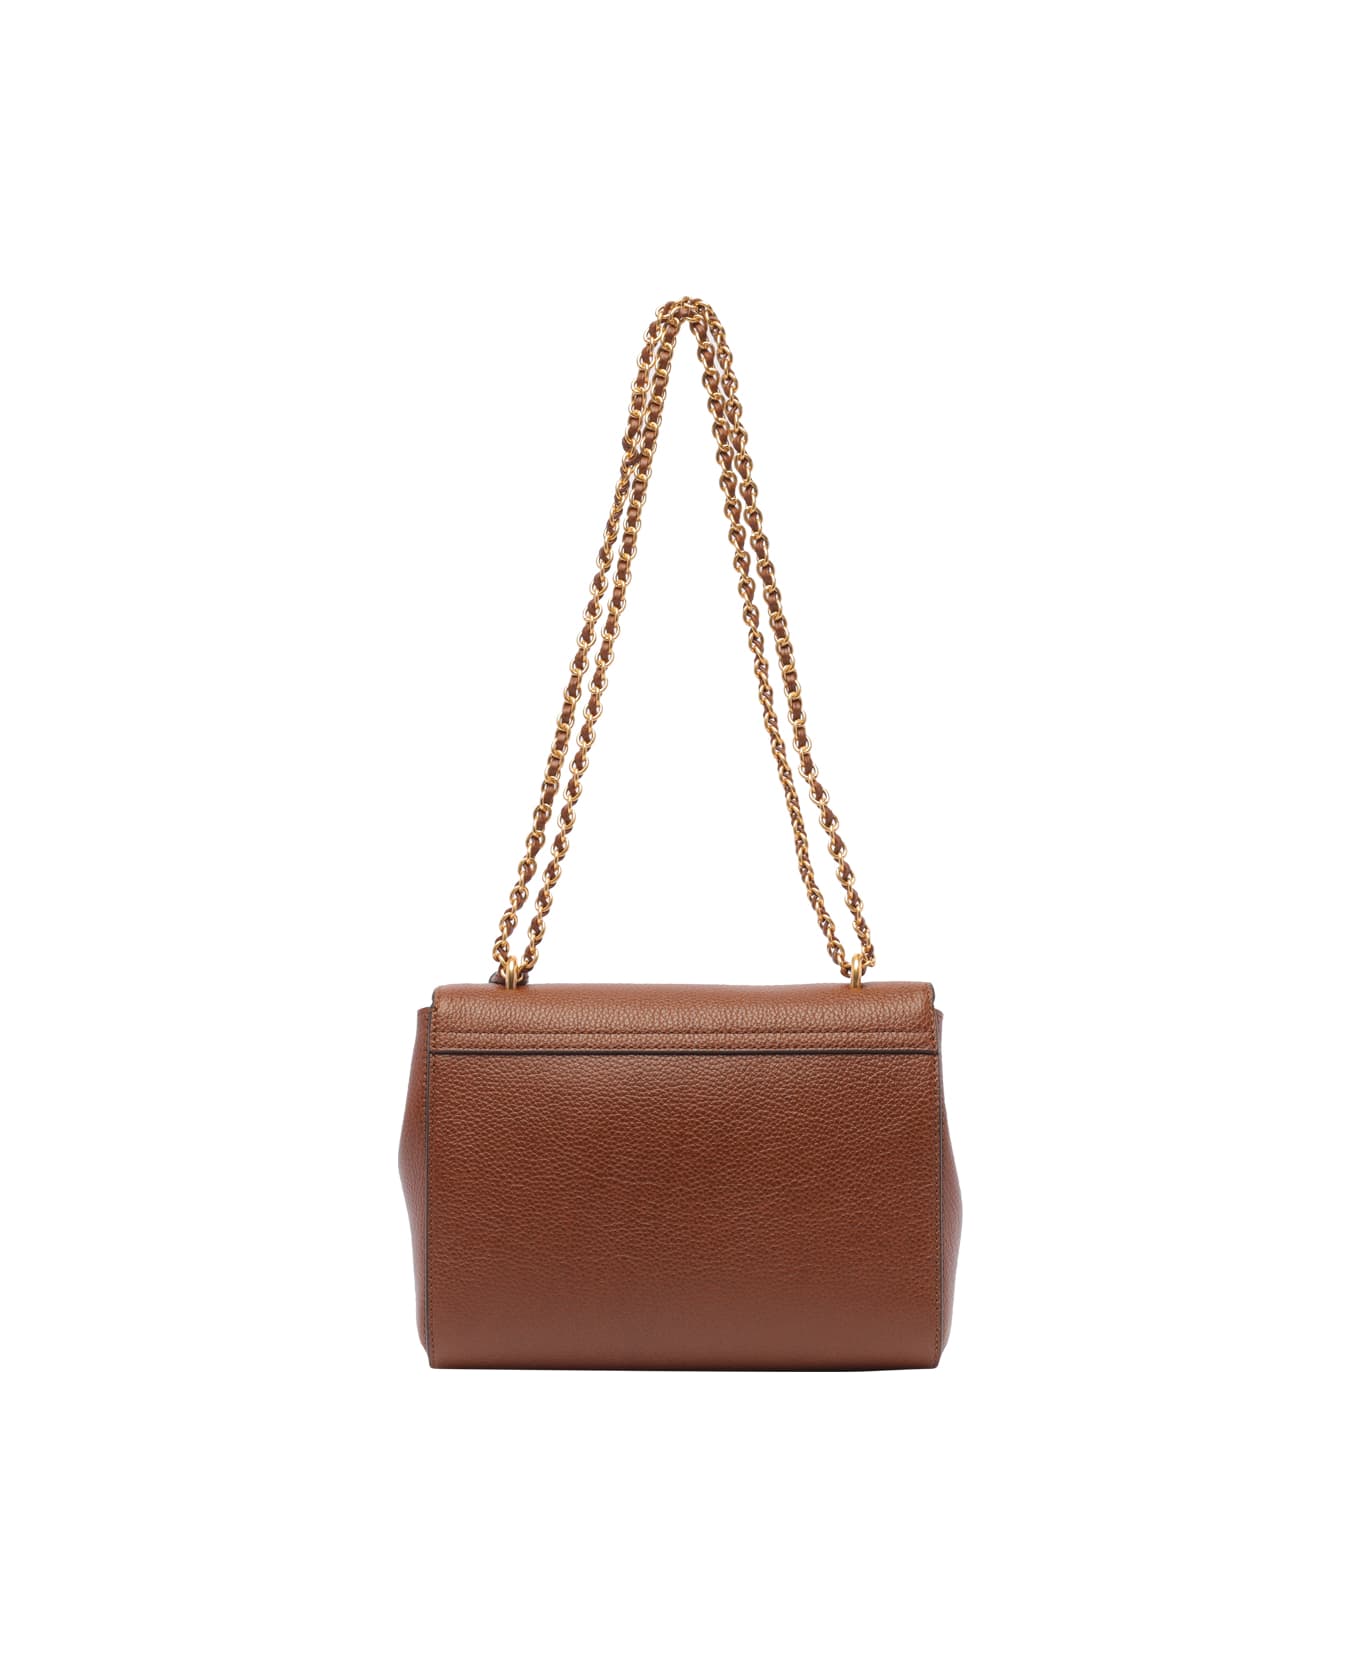 Mulberry Lily Crossbody Bag - Brown